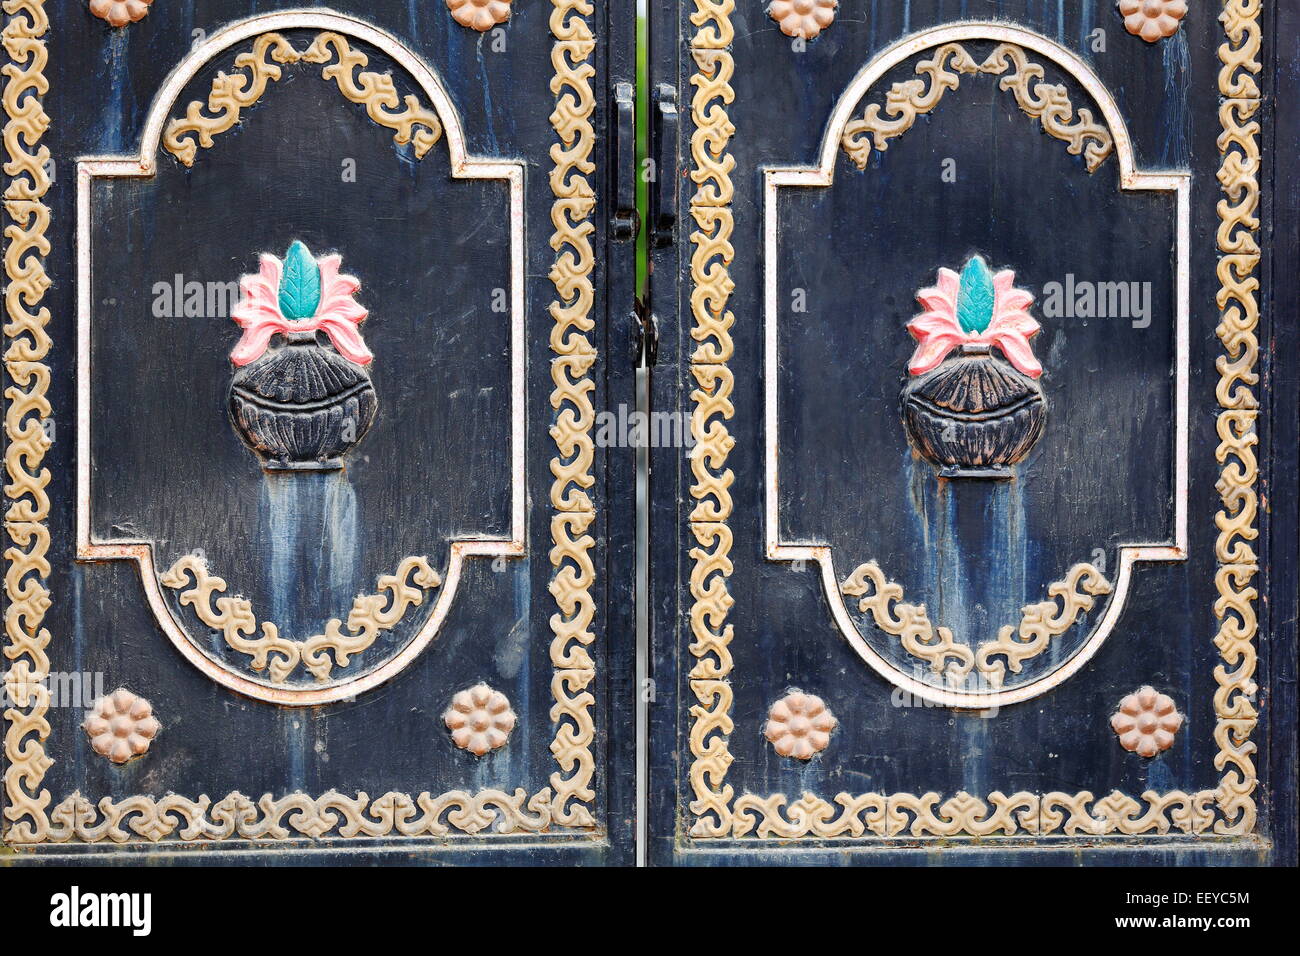 Colorist relief decoration on a dark painted metallic door of a house in Godawari town. Lalitpur distr.-Bagmati zone-Nepal. Stock Photo